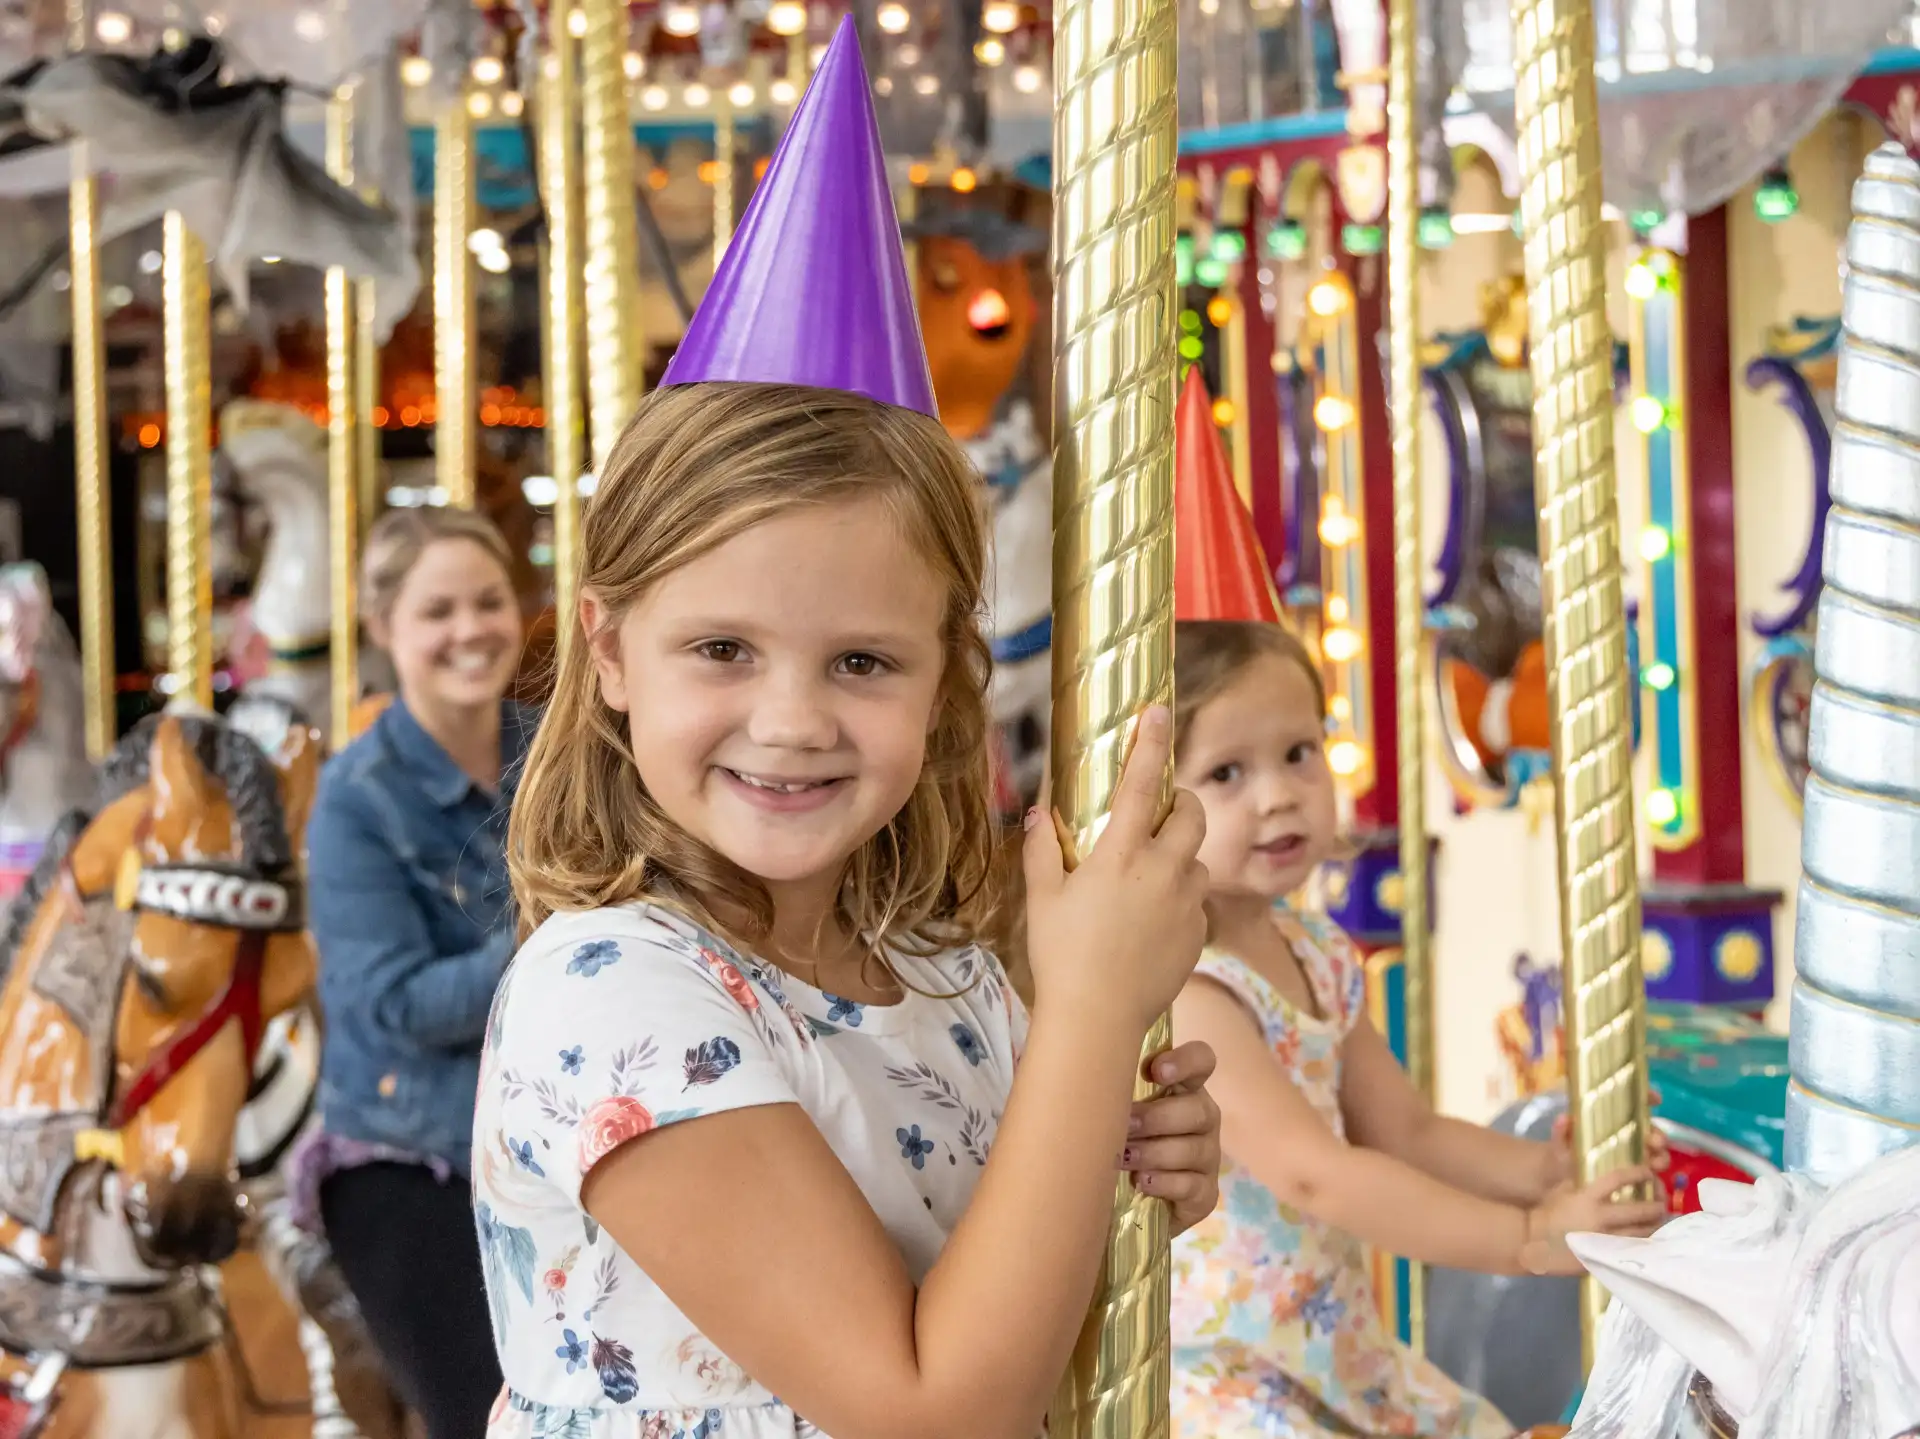 Kids with party hats riding the carousel. 